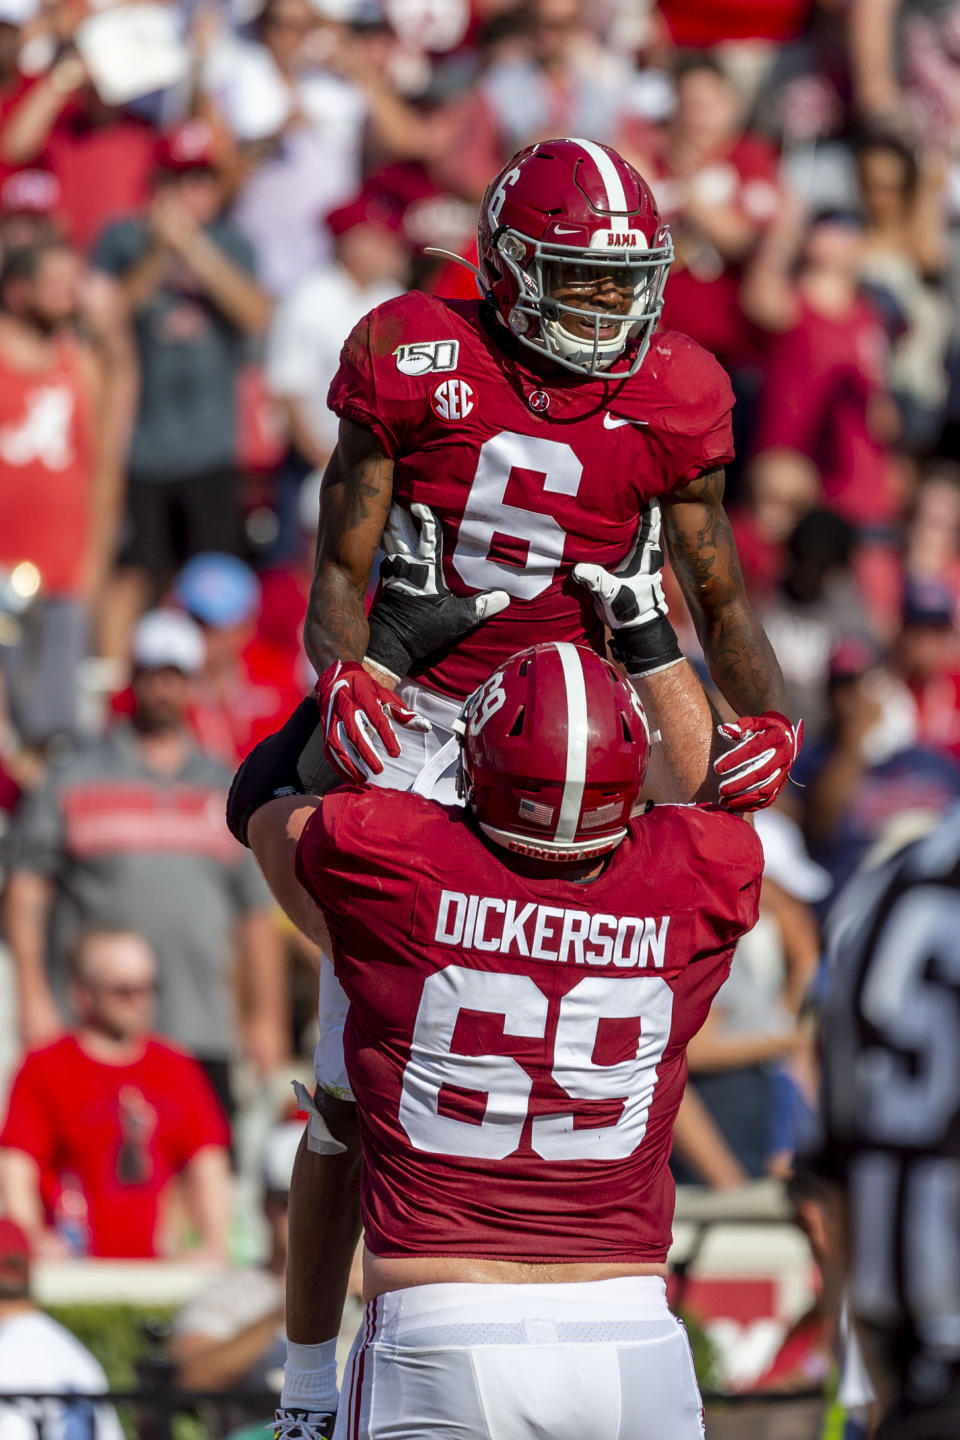 Alabama offensive lineman Landon Dickerson (69) lifts Alabama wide receiver DeVonta Smith (6) to celebrate Smith's touchdown against Mississippi during the first half of an NCAA college football game, Saturday, Sept. 28, 2019, in Tuscaloosa, Ala. (AP Photo/Vasha Hunt)